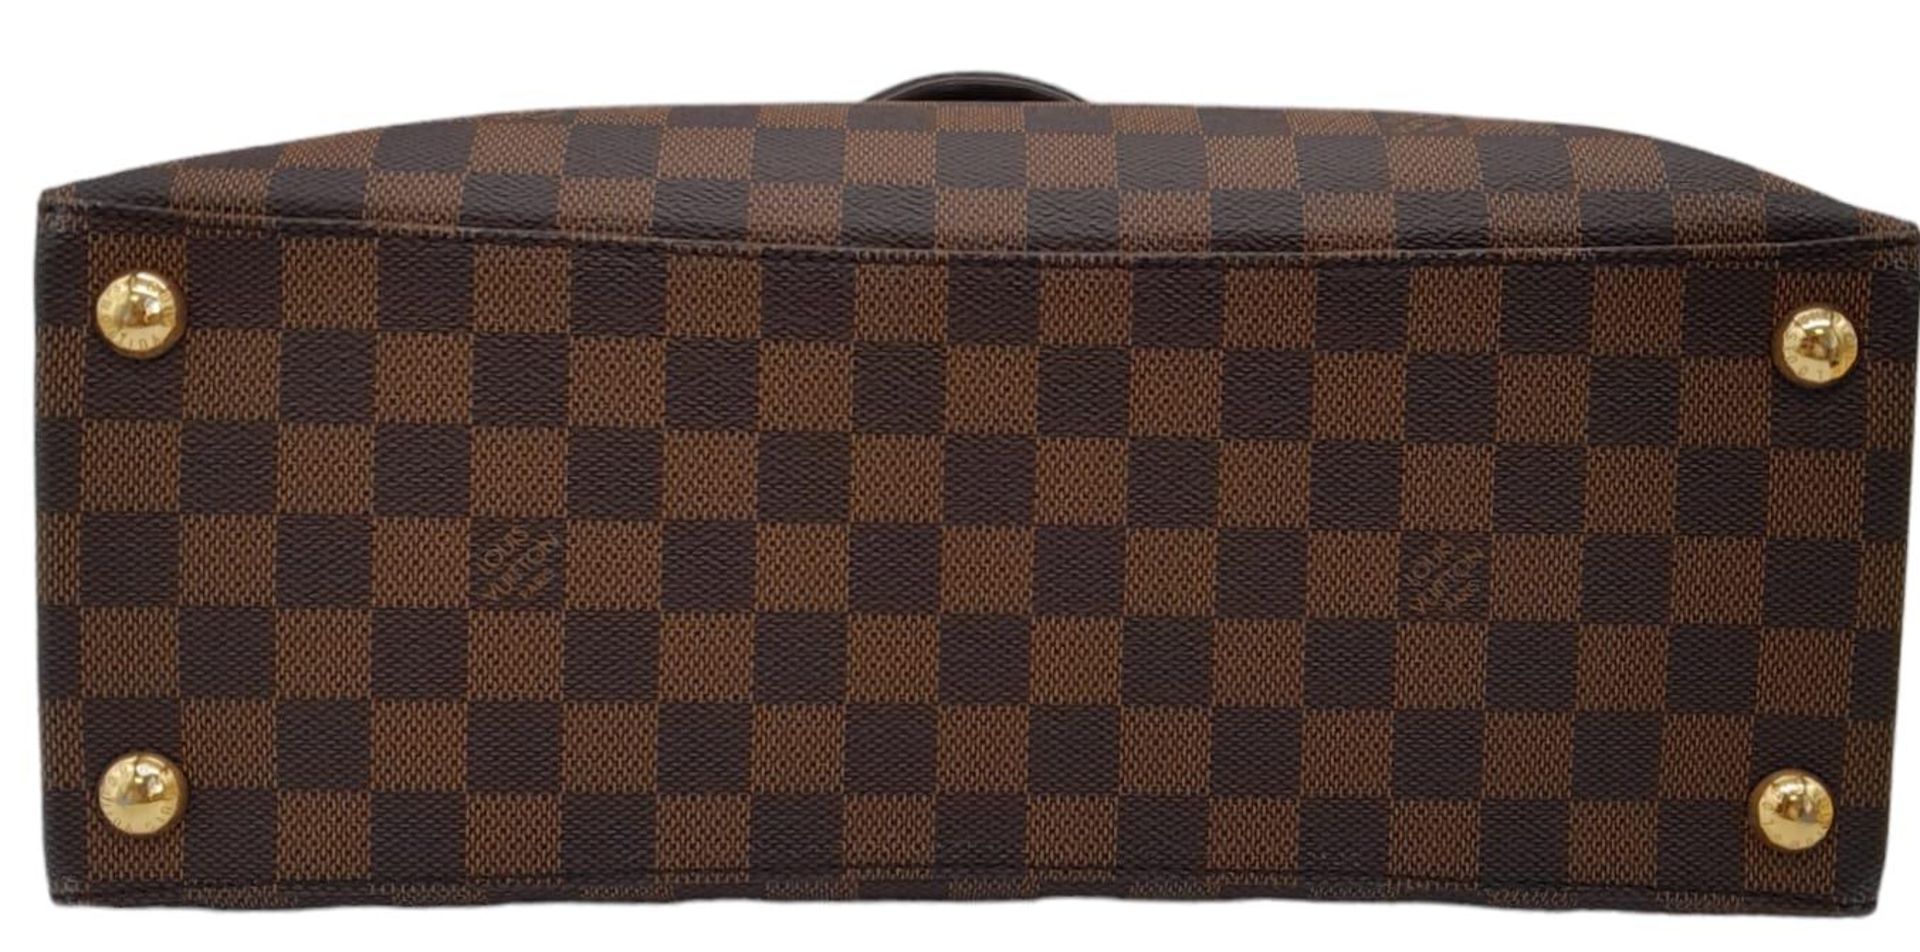 A Louis Vuitton Damier Ebene Brampton Handbag. Leather exterior with two rolled leather handles, - Image 5 of 11